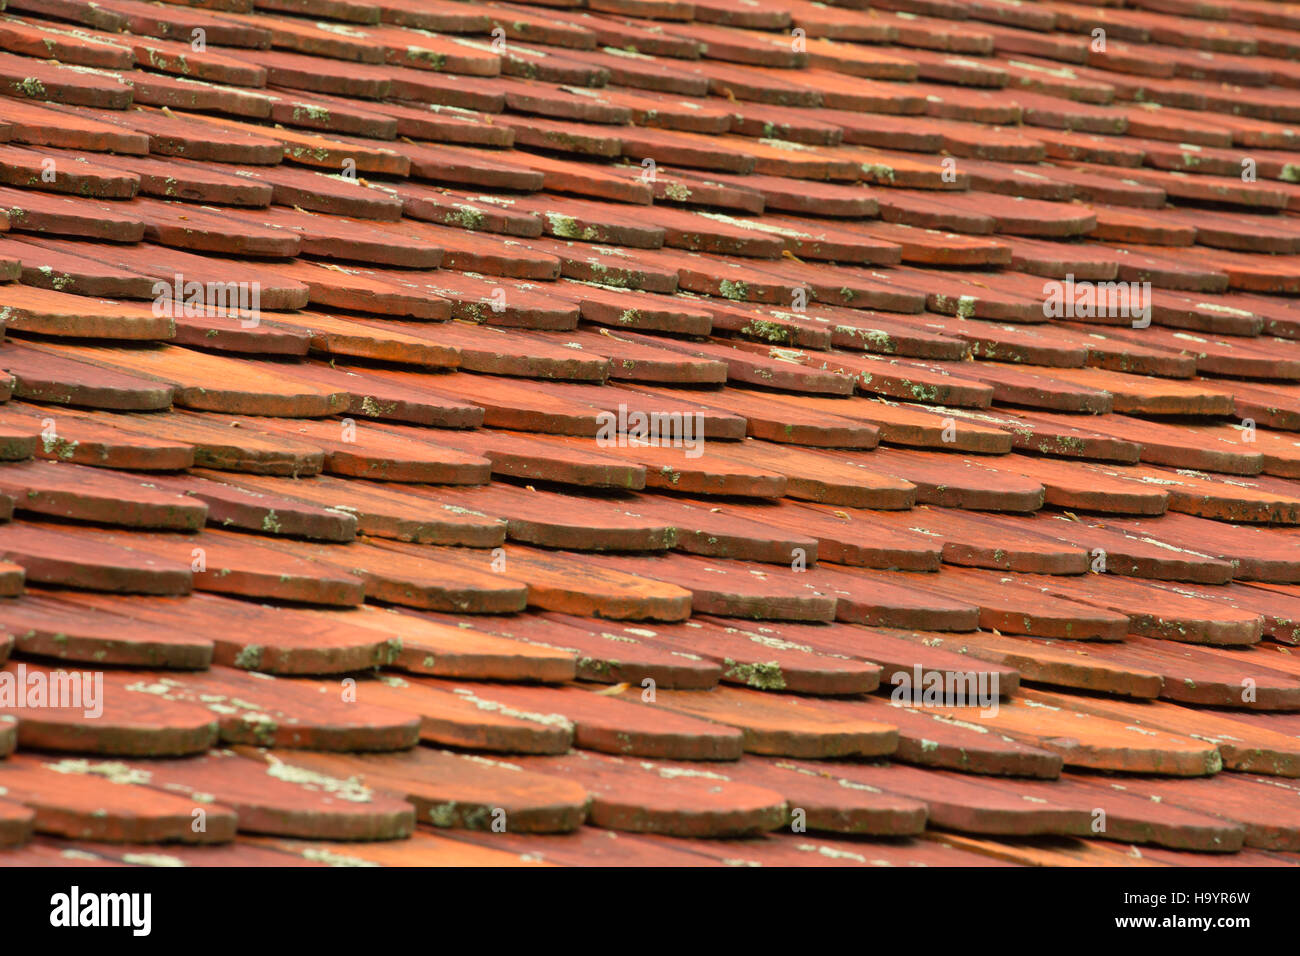 Tile roof, Hopewell Furnace National Historic Site, Pennsylvania Stock Photo